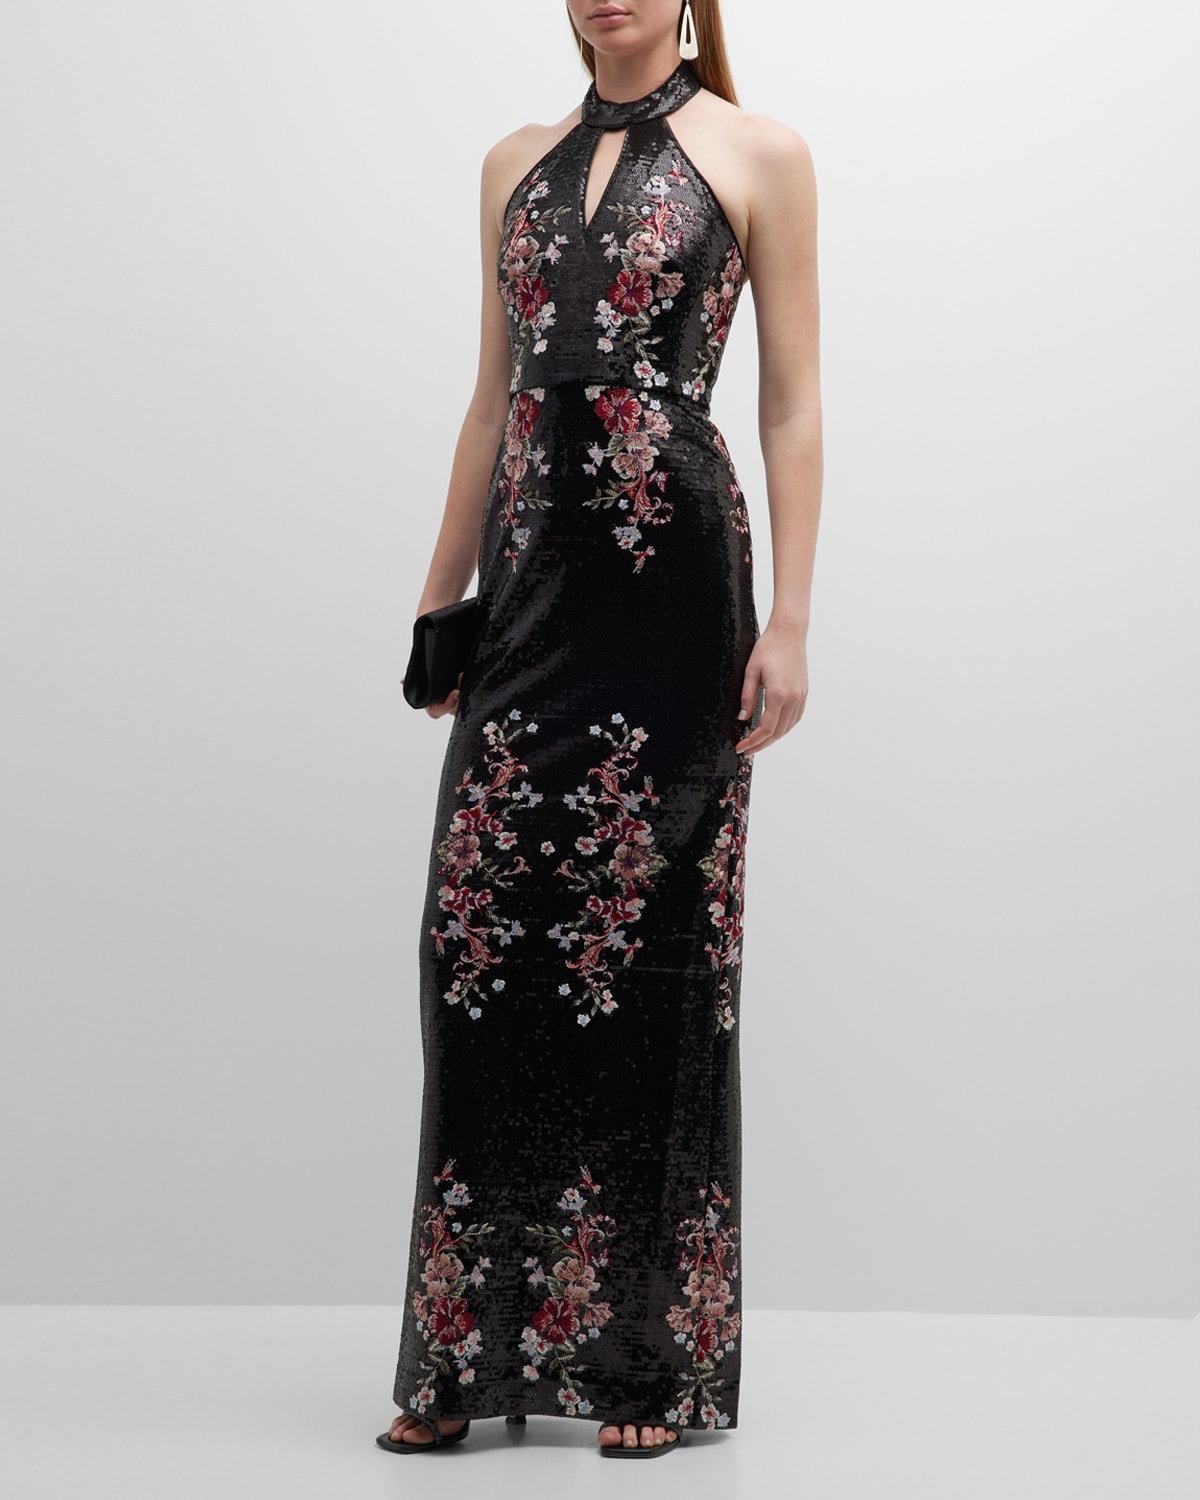 MARCHESA NOTTE FLORAL-EMBROIDERED CUTOUT SEQUIN HALTER GOWN